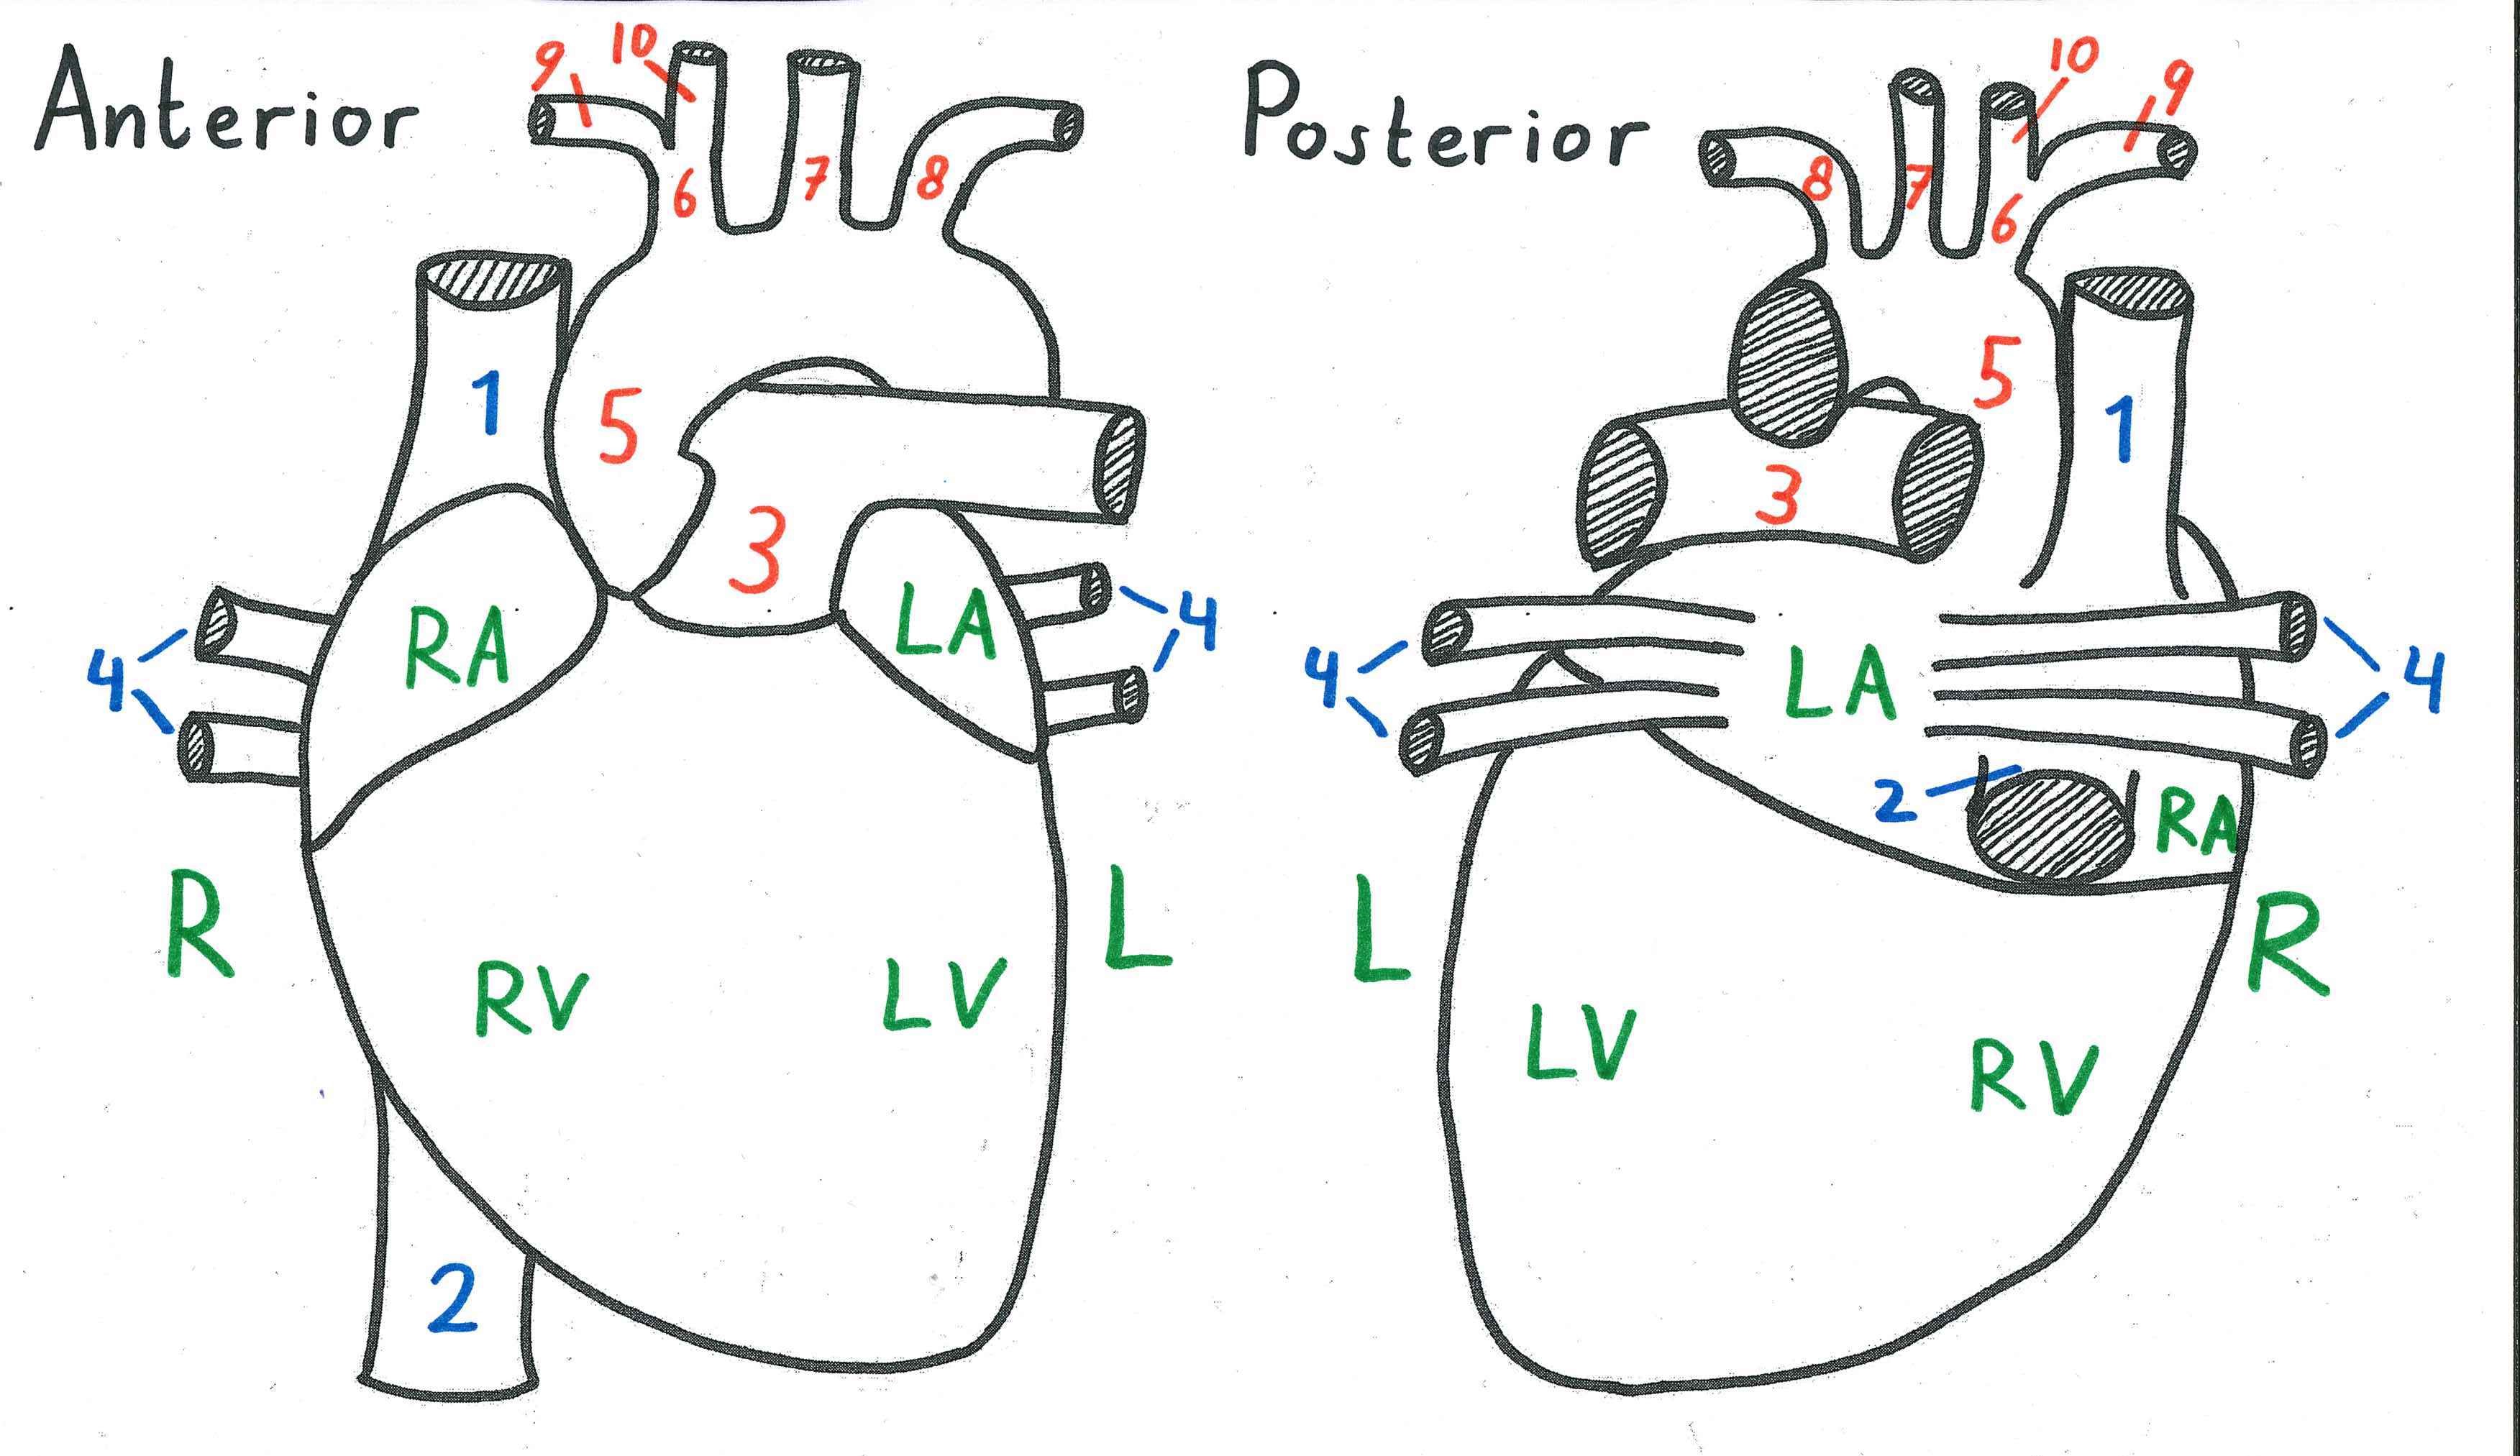 A drawing of the heart as seen from anterior and posterior, with numbered labels